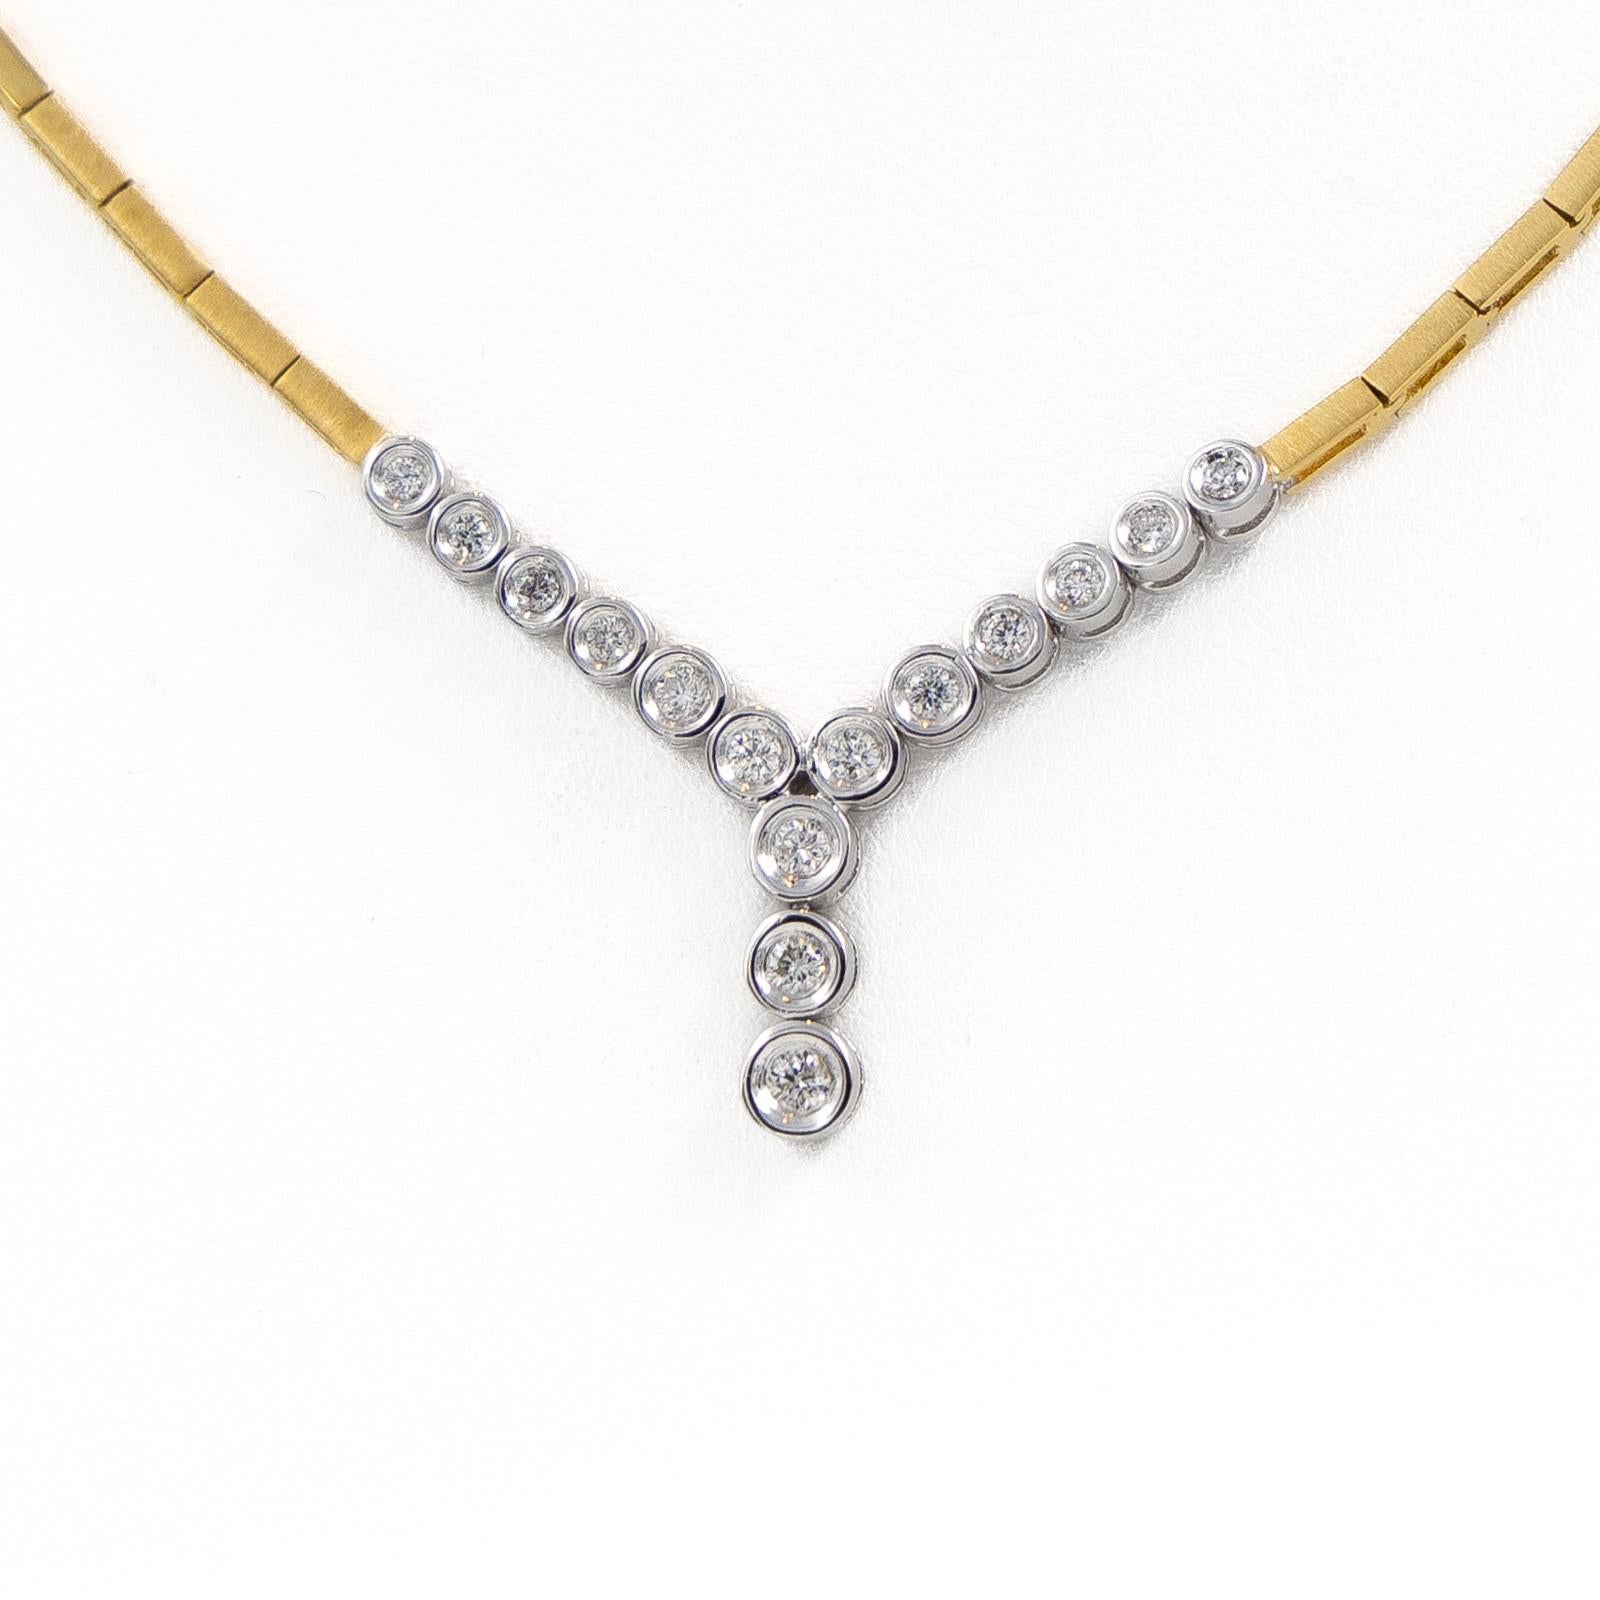 Necklace in yellow and white gold 750 thousandths (18 carats). set with 15 diamonds. brilliant cut. one around 0.07 ct. 2 around 0.05 ct each. 4 around 0.05 ct each and 8 around 0.02 ct. Total weight of diamonds: 0.55 ct. Length of the necklace: 44